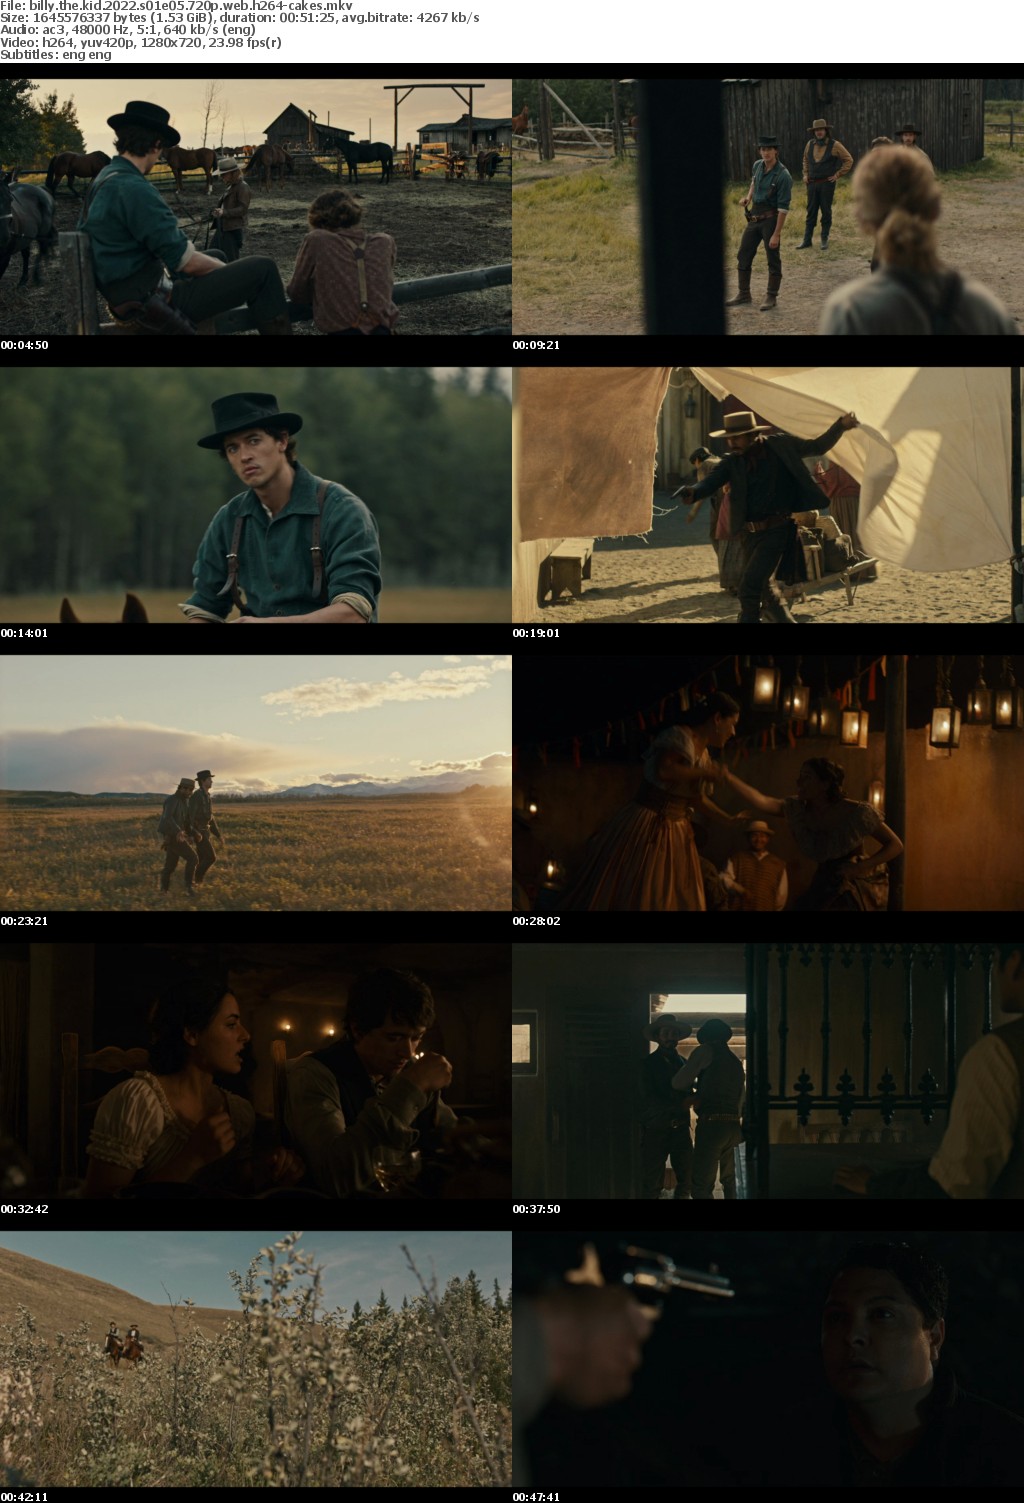 Billy The Kid 2022 S01E05 720p WEB H264-CAKES